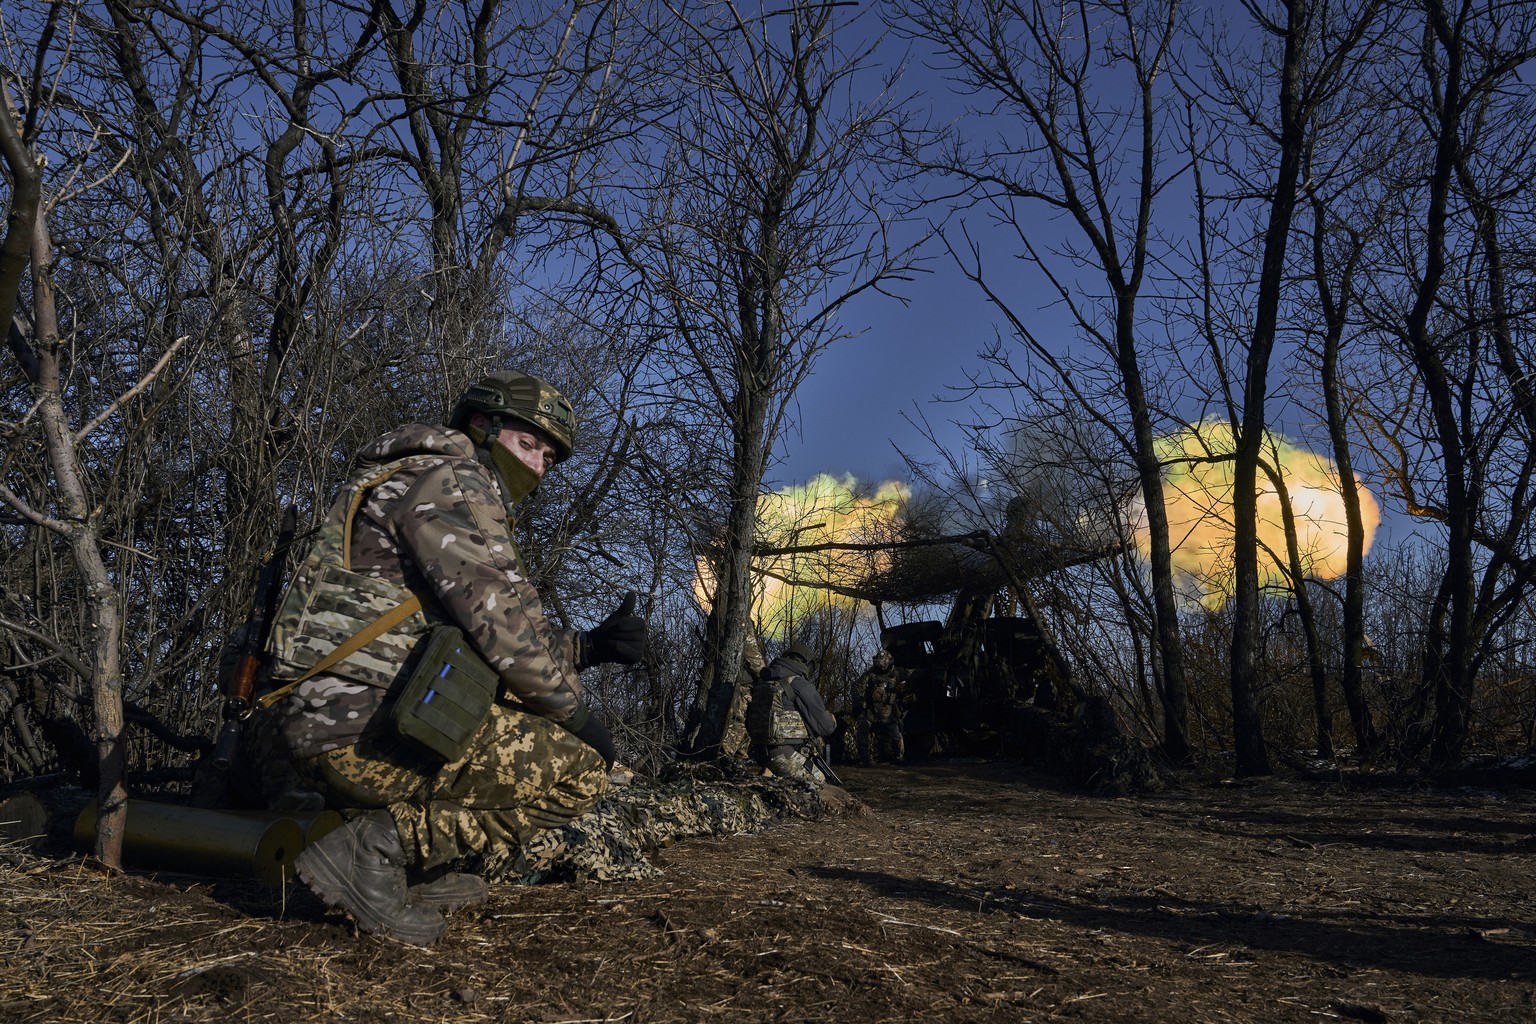 Ukrainian soldiers fire at the Russian positions in the frontline close to Bakhmut, Donetsk region, Ukraine, Wednesday, Feb. 8, 2023. (AP Photo/Libkos)